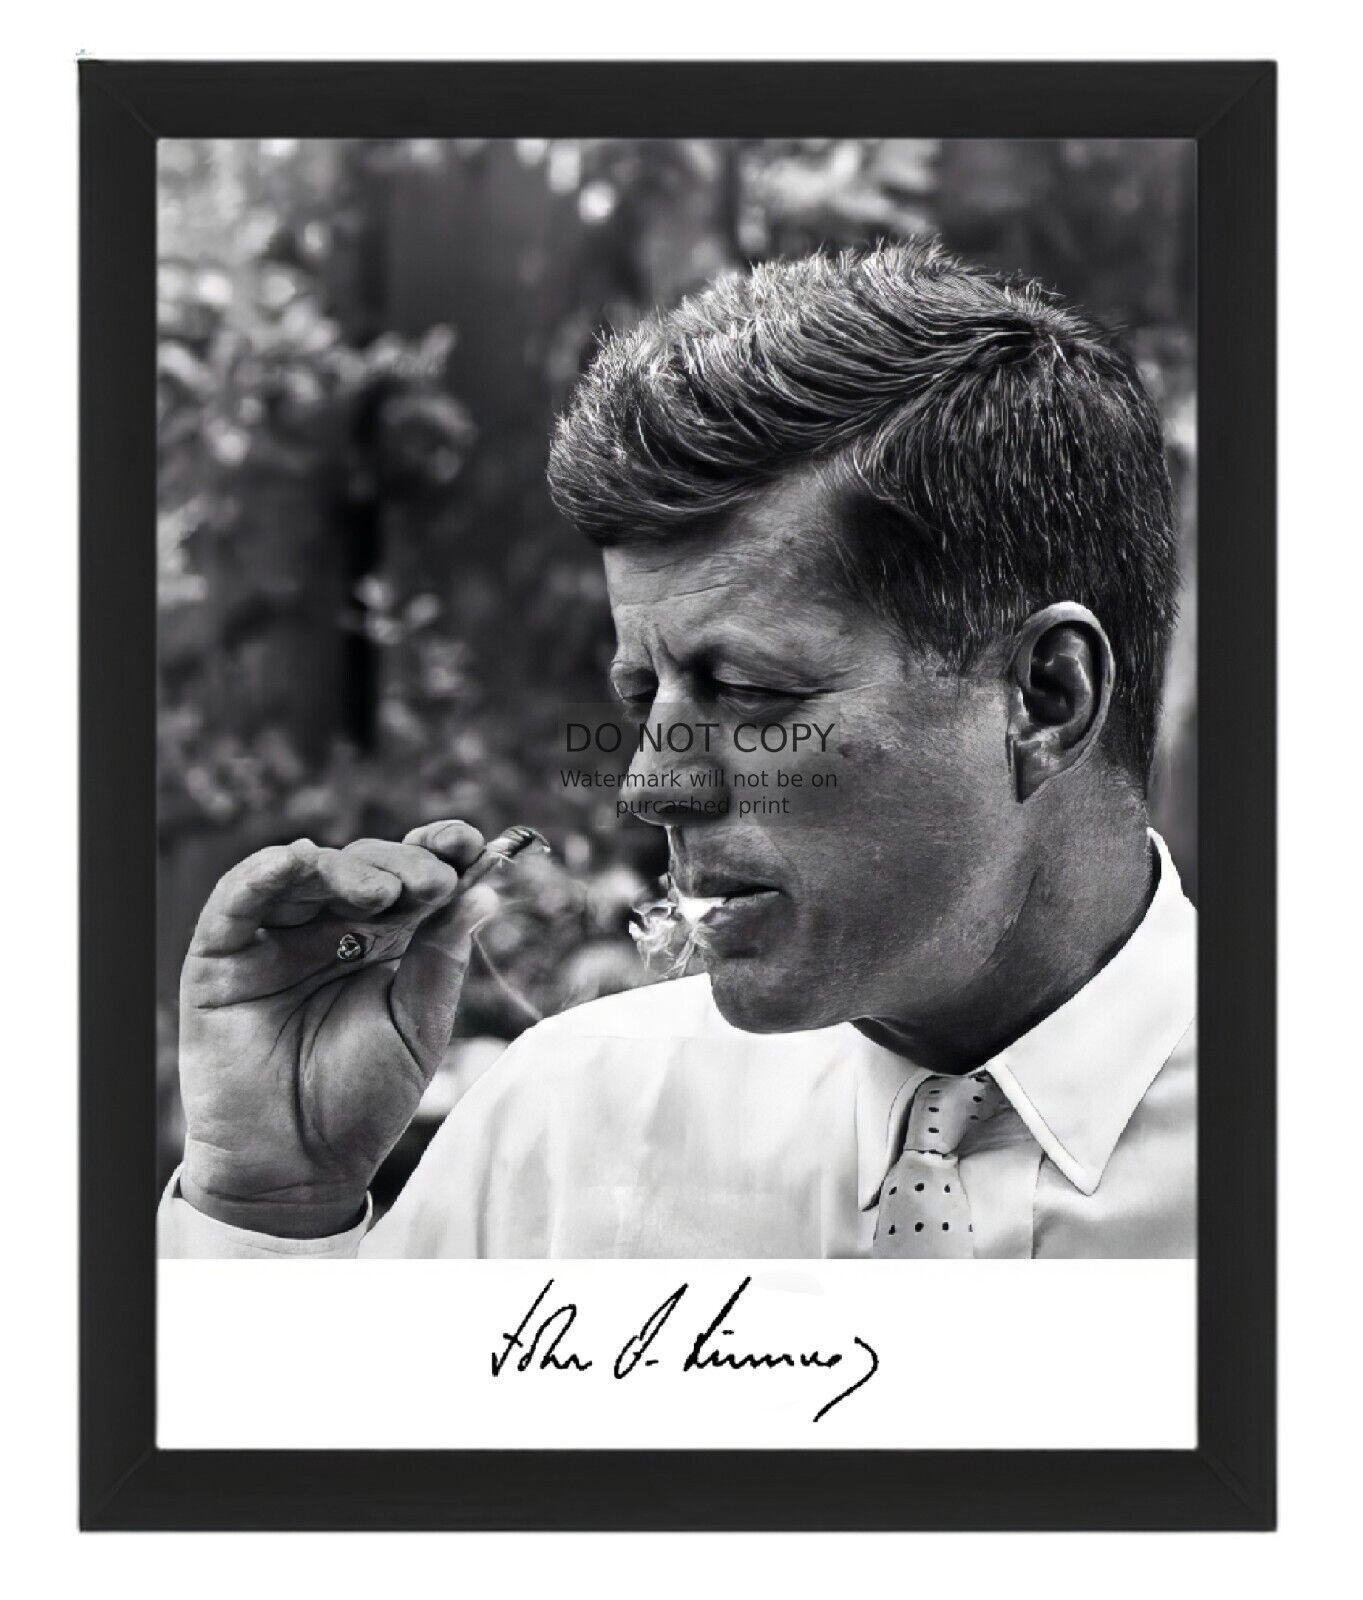 PRESIDENT JOHN F. KENNEDY SMOKING WEED AUTOGRAPHED 8X10 B&W FRAMED PHOTOGRAPH